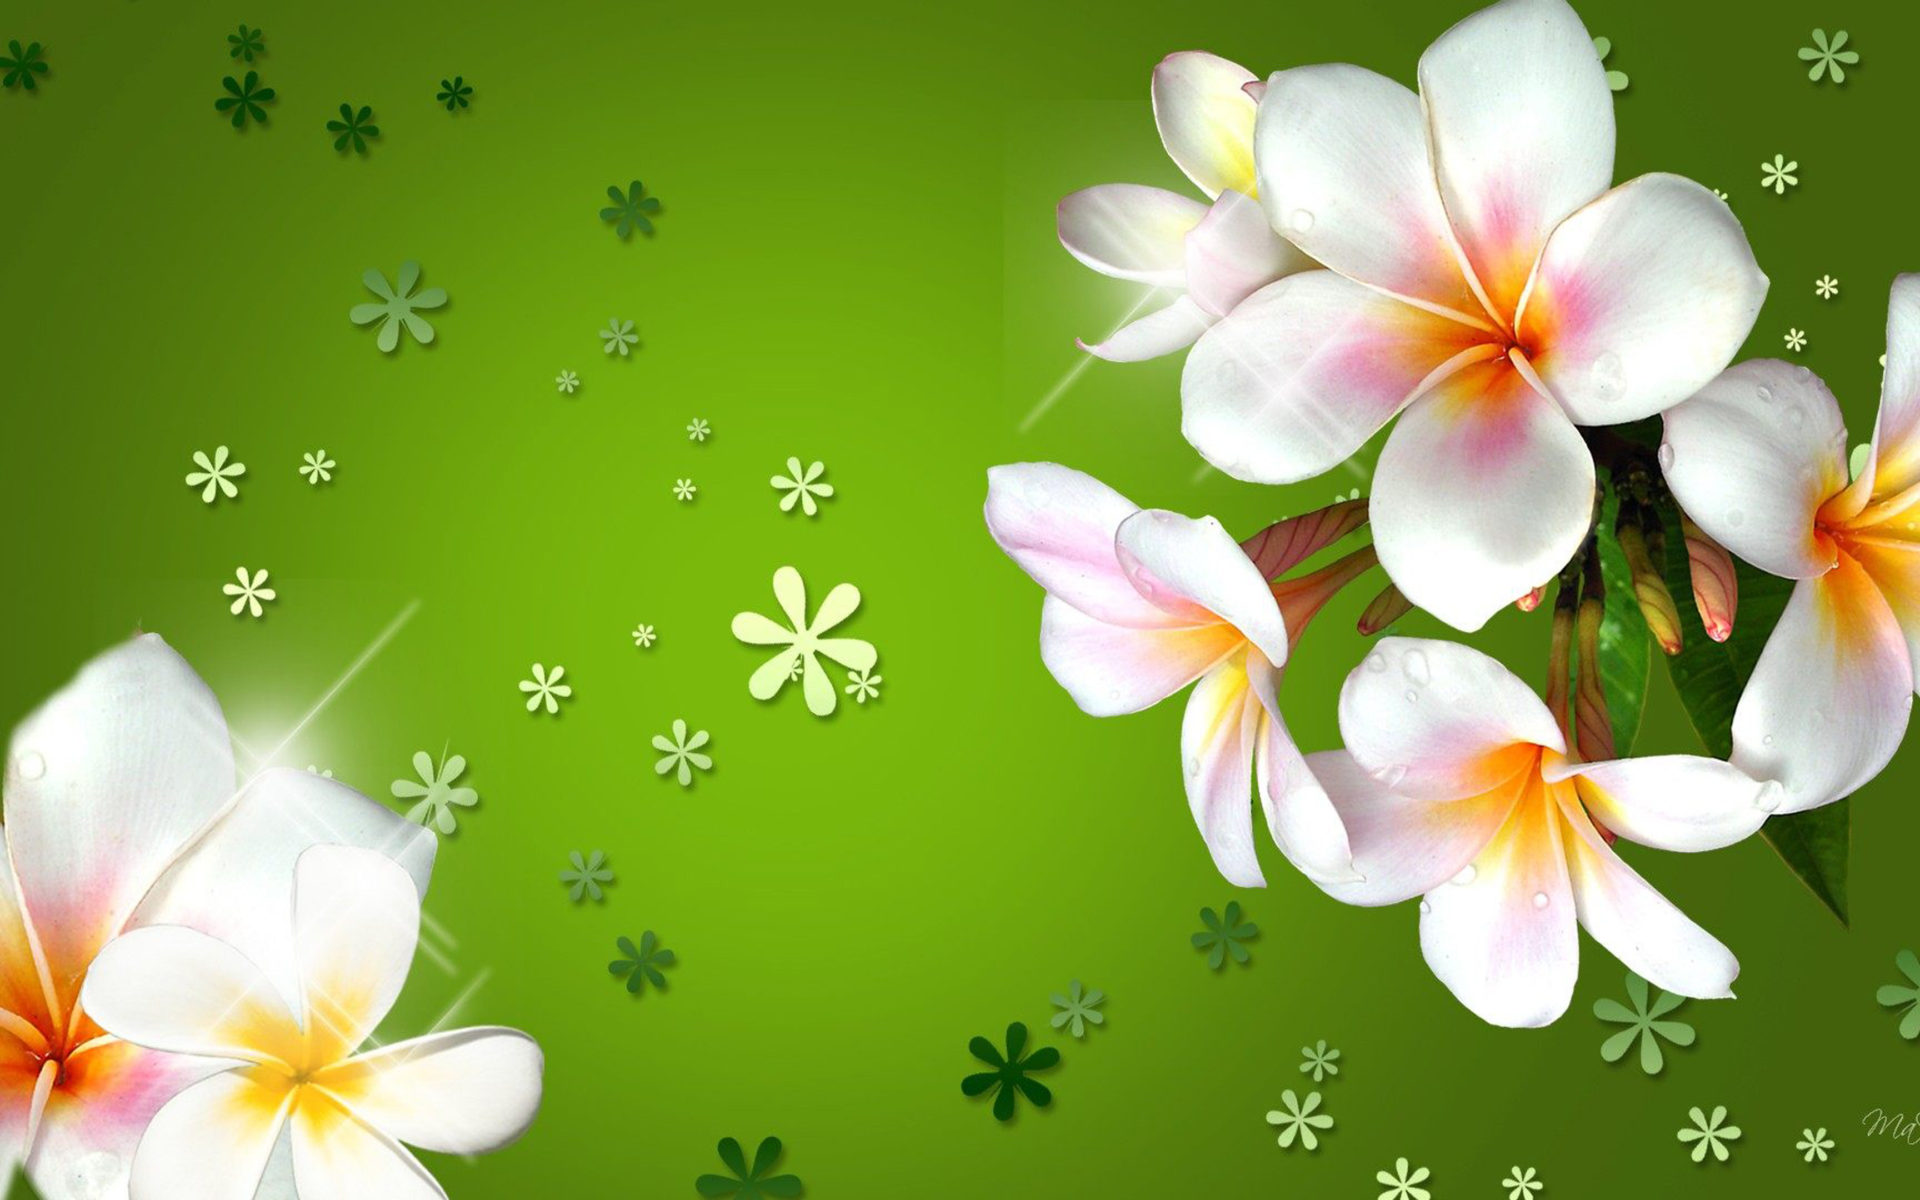 Plumeria Three Colored Flowers With Bright Green Background, Wallpaper13.com